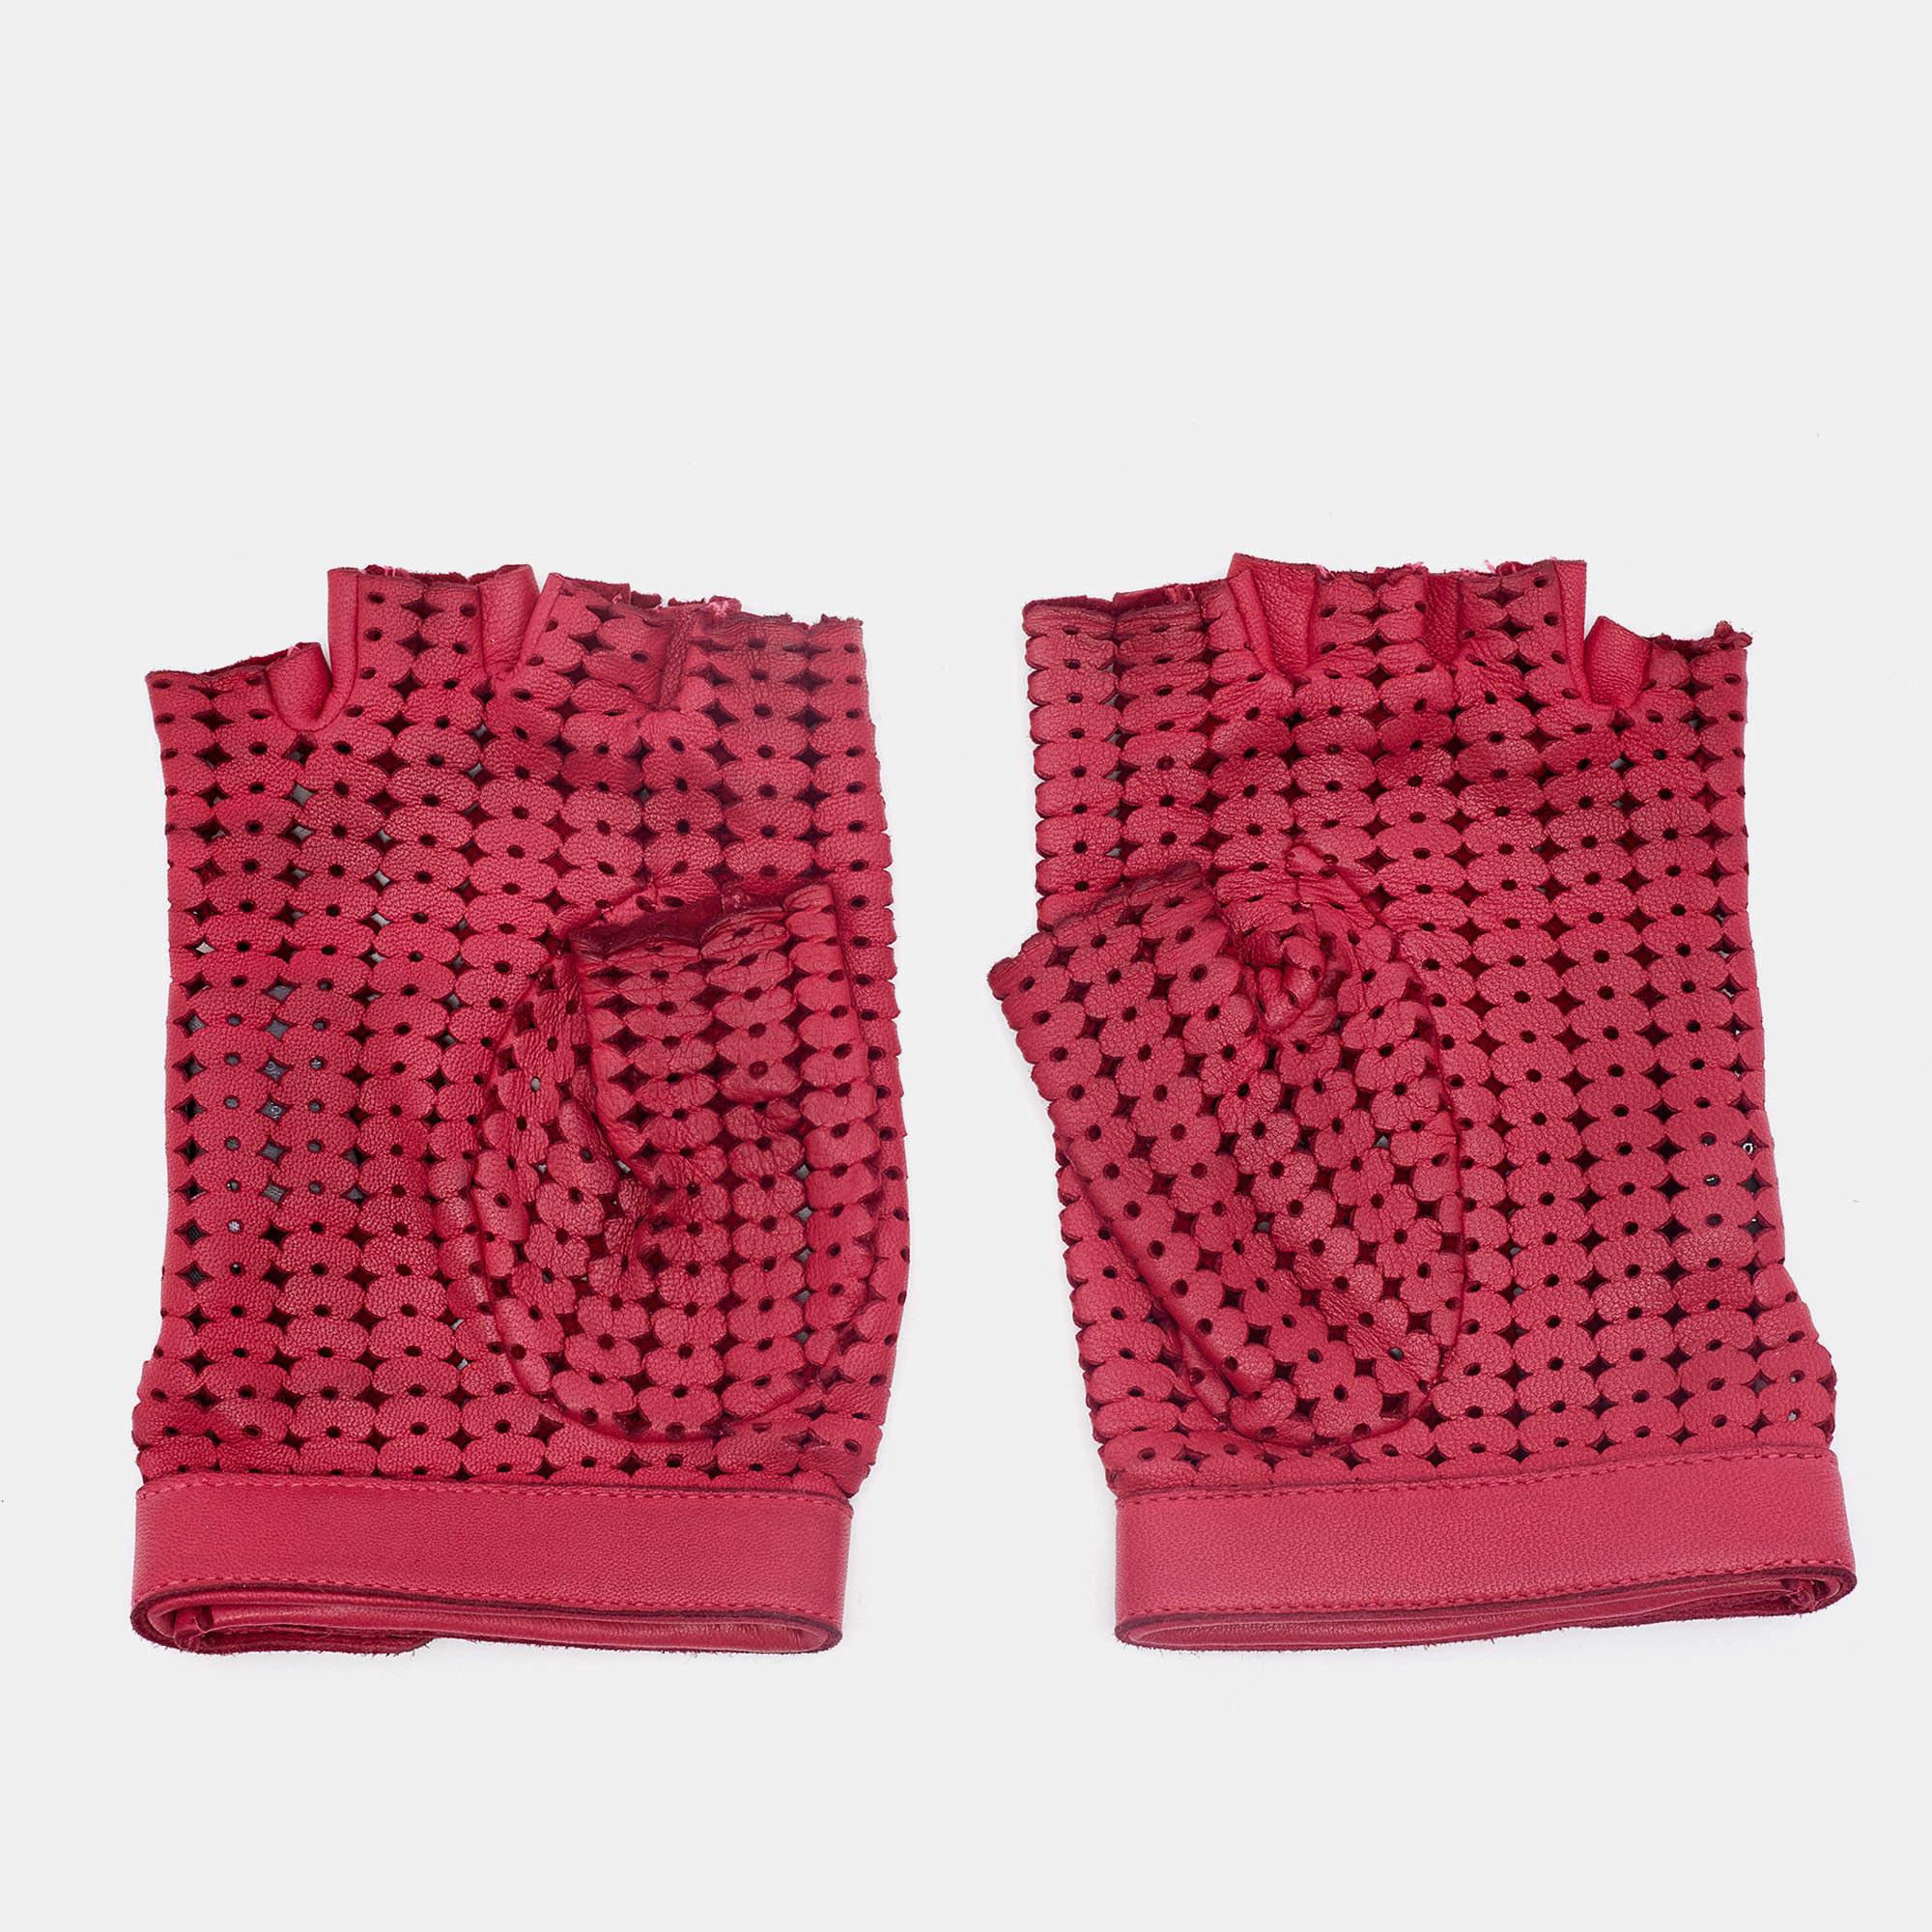 Lend a stylish finish to a bold look with this pair of Chanel gloves. Made from perforated lambskin leather, the gloves have a burgundy shade and the CC logo lock detail on both.

